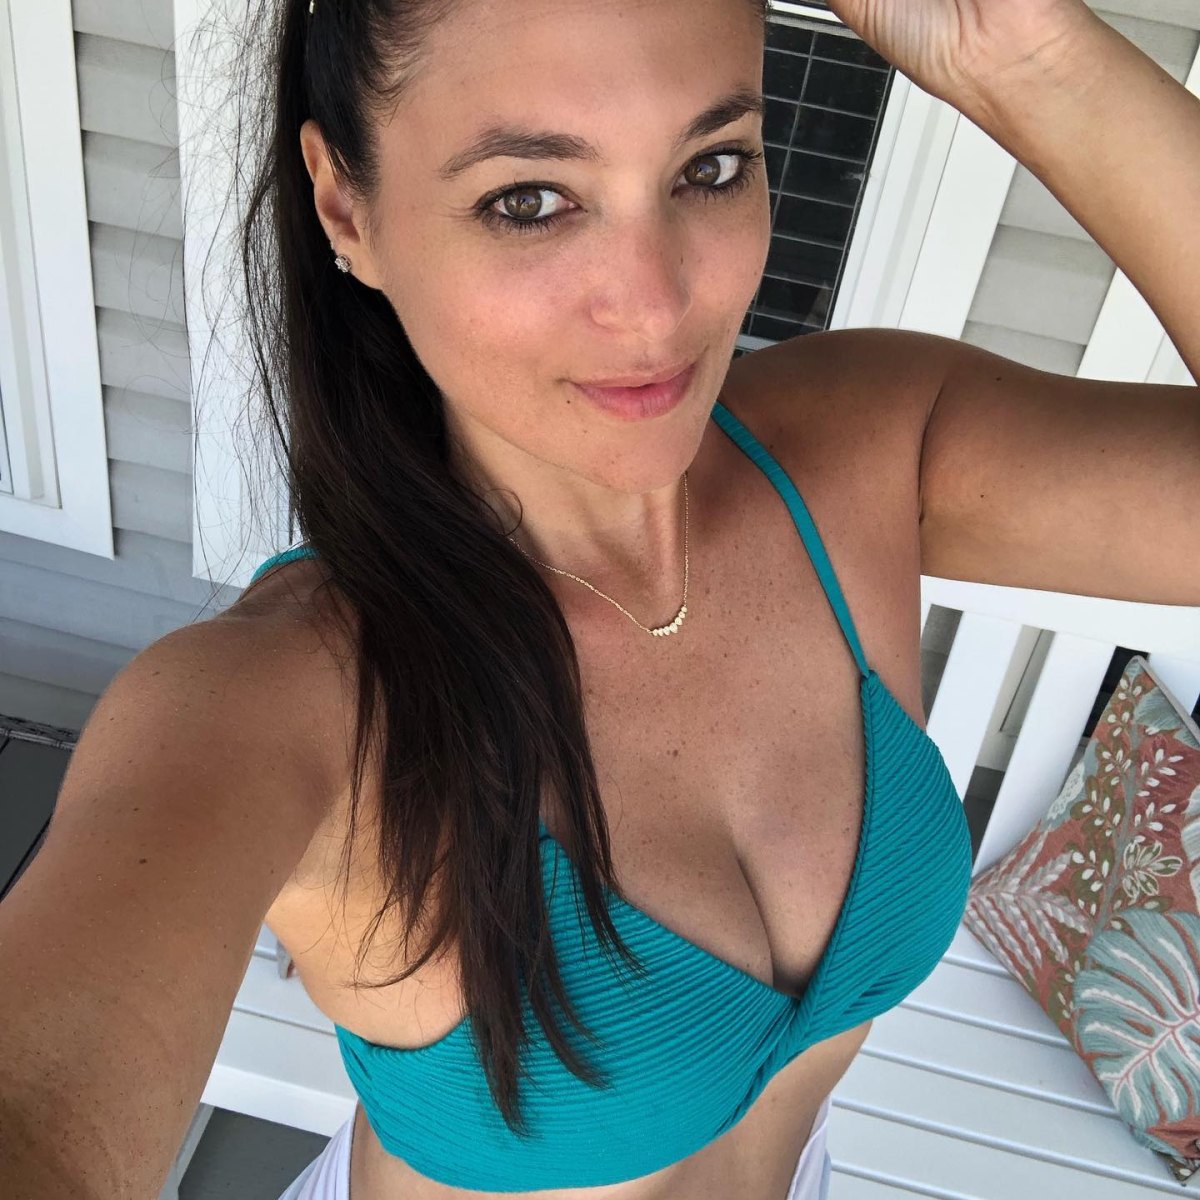 Sammi 'Sweetheart' Giancola has 'no regrets' about 'Jersey Shore' style